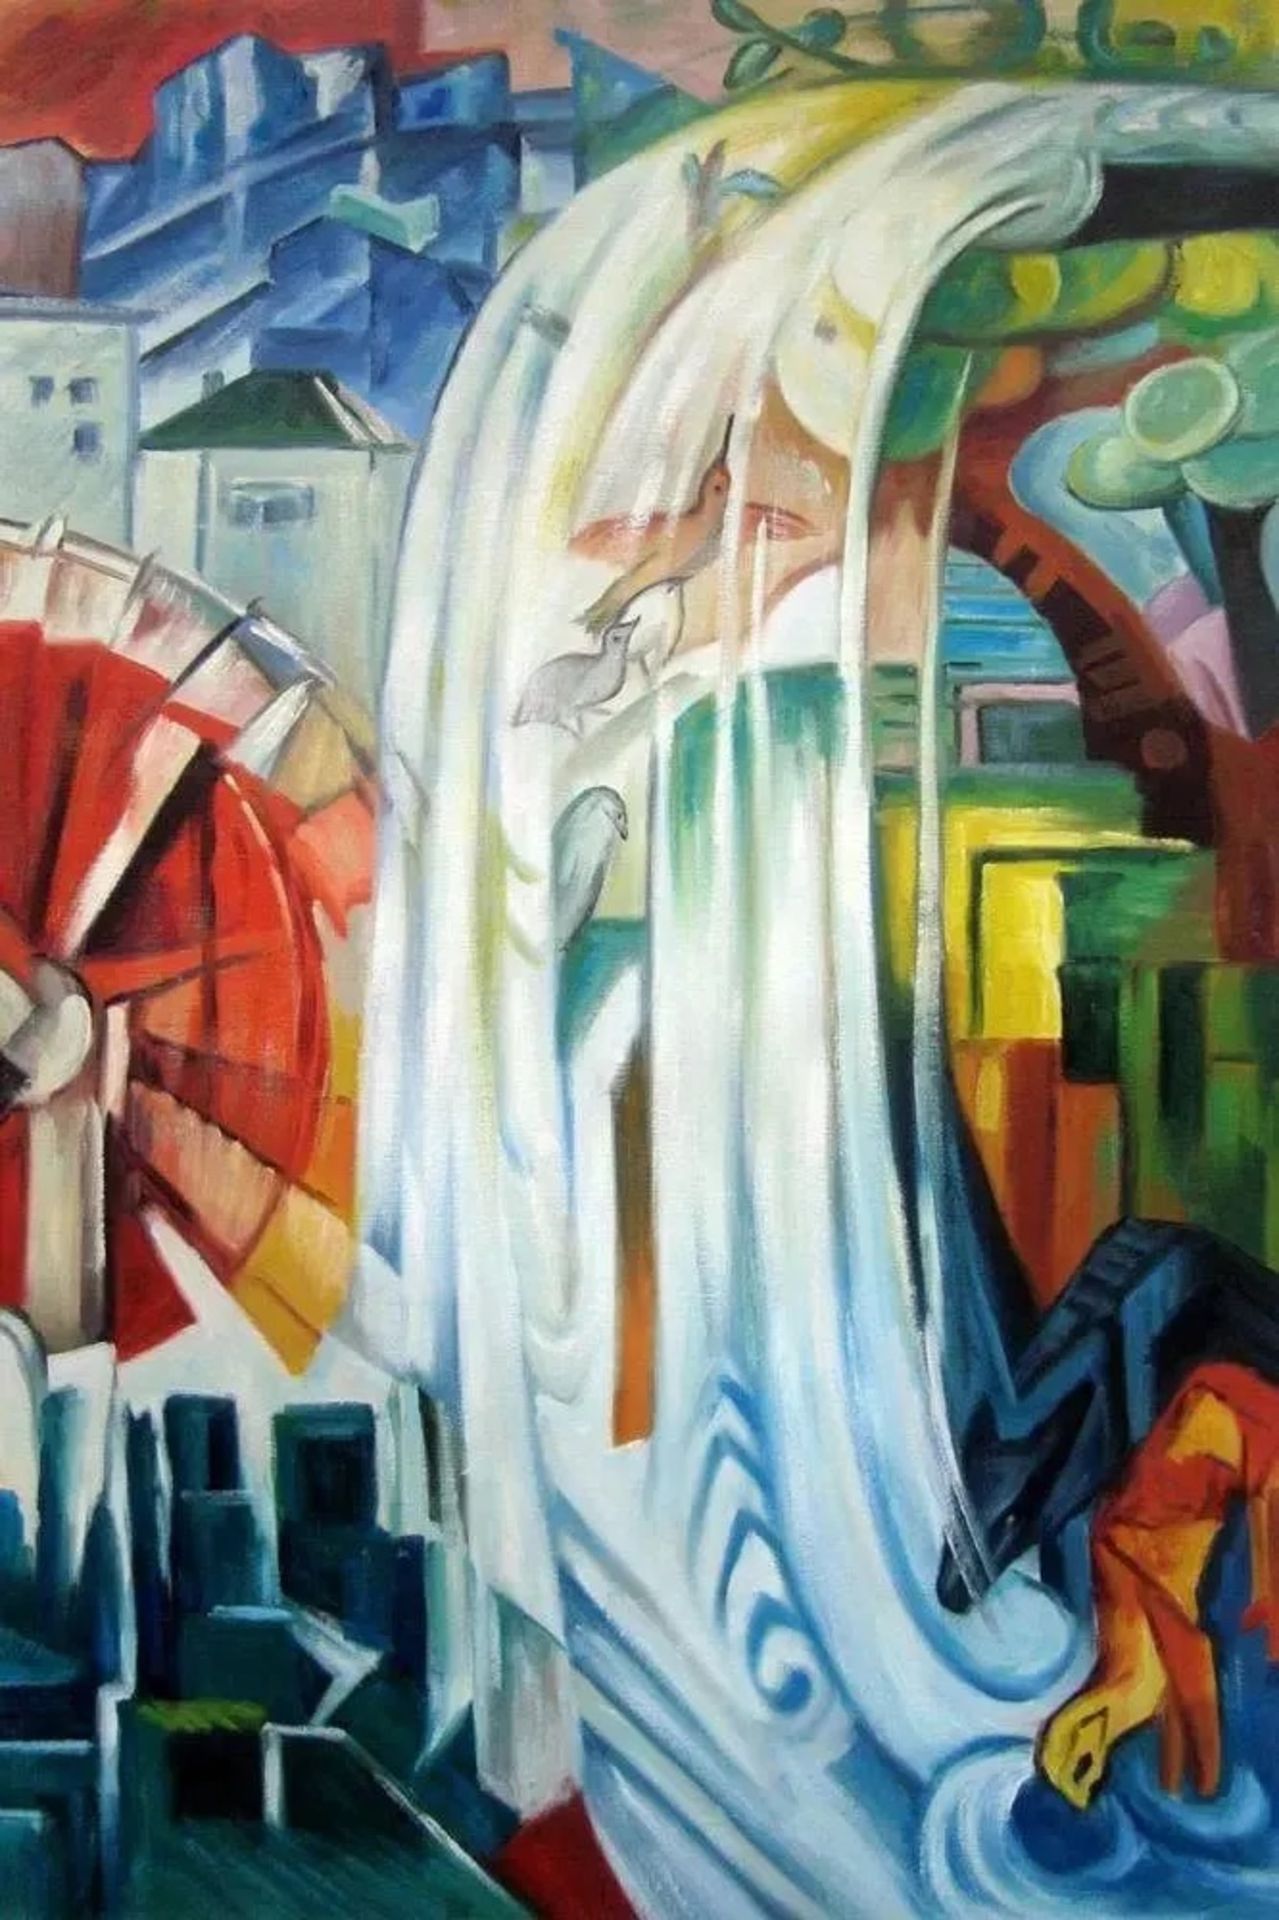 Franz Marc "The Bewitched Mill" Oil Painting